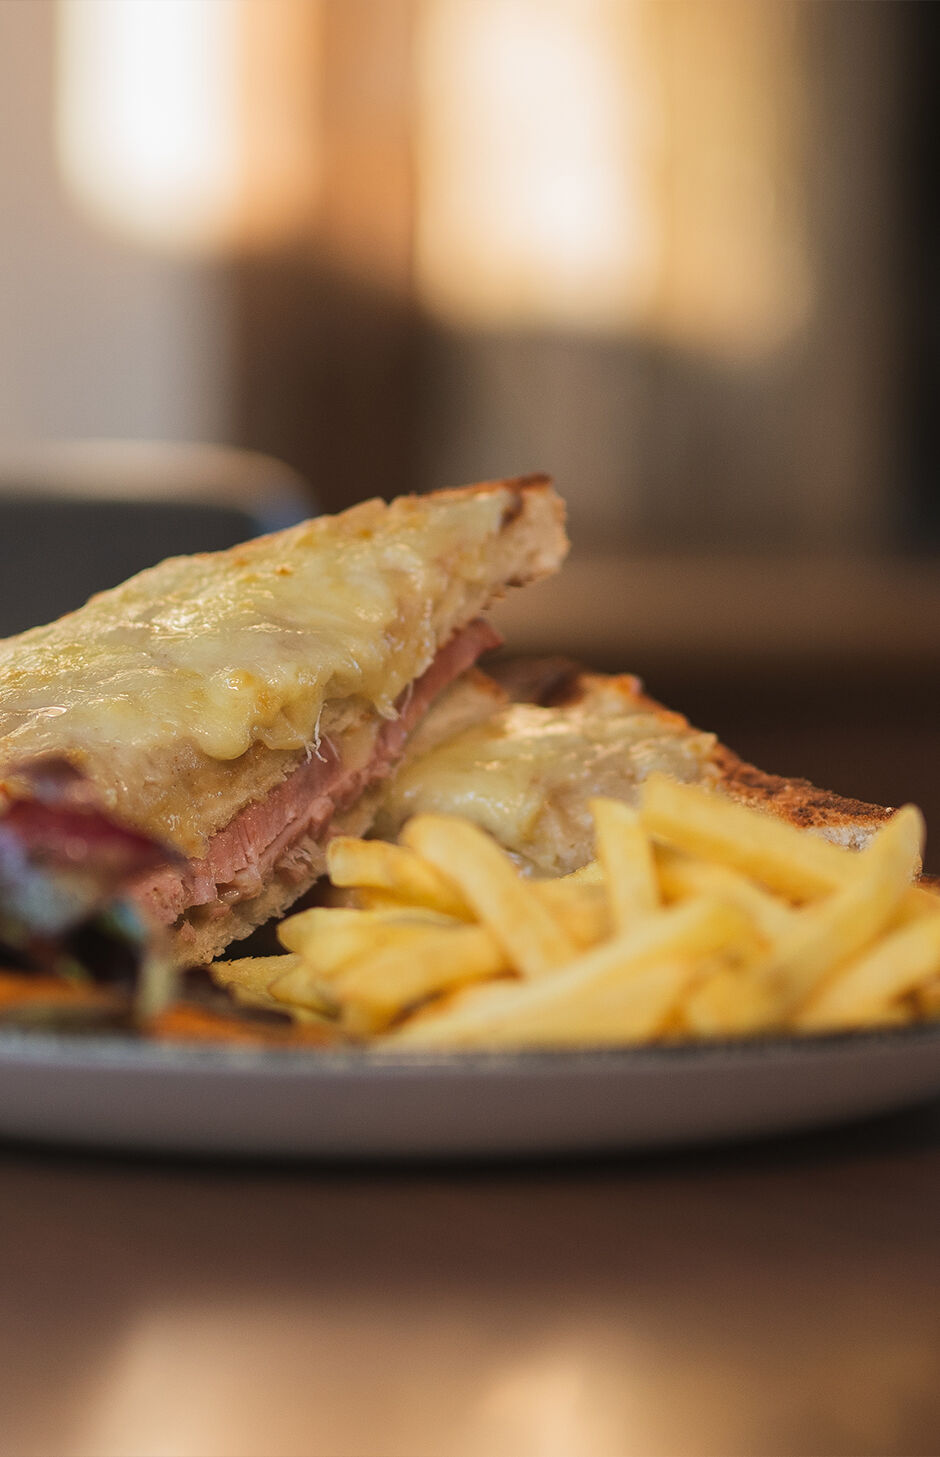 Essendon Country Club Ham and Cheese Toastie